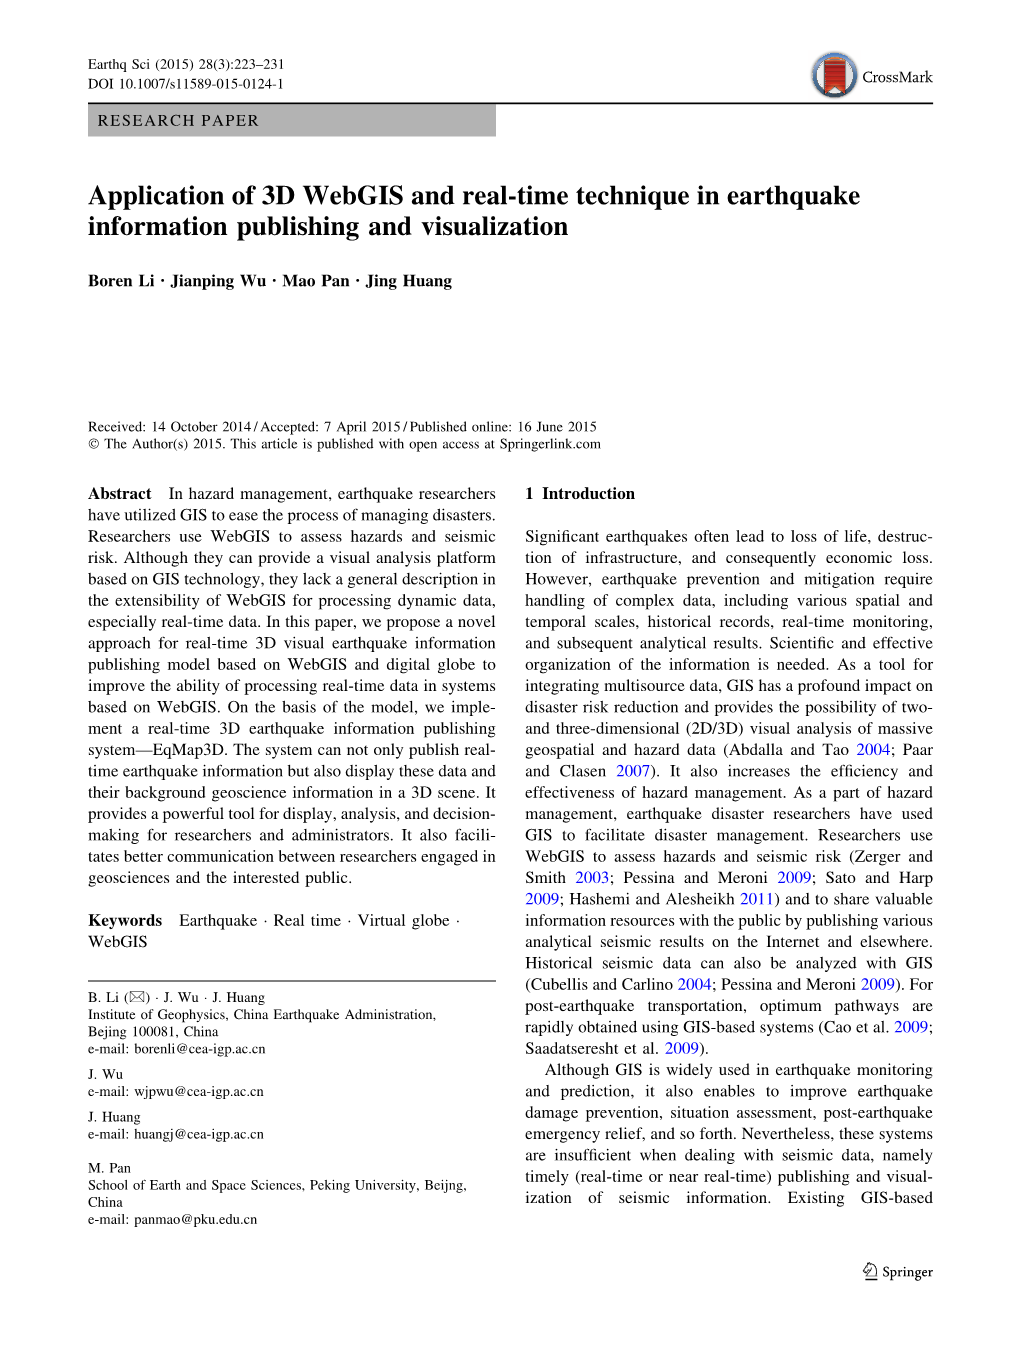 Application of 3D Webgis and Real-Time Technique in Earthquake Information Publishing and Visualization